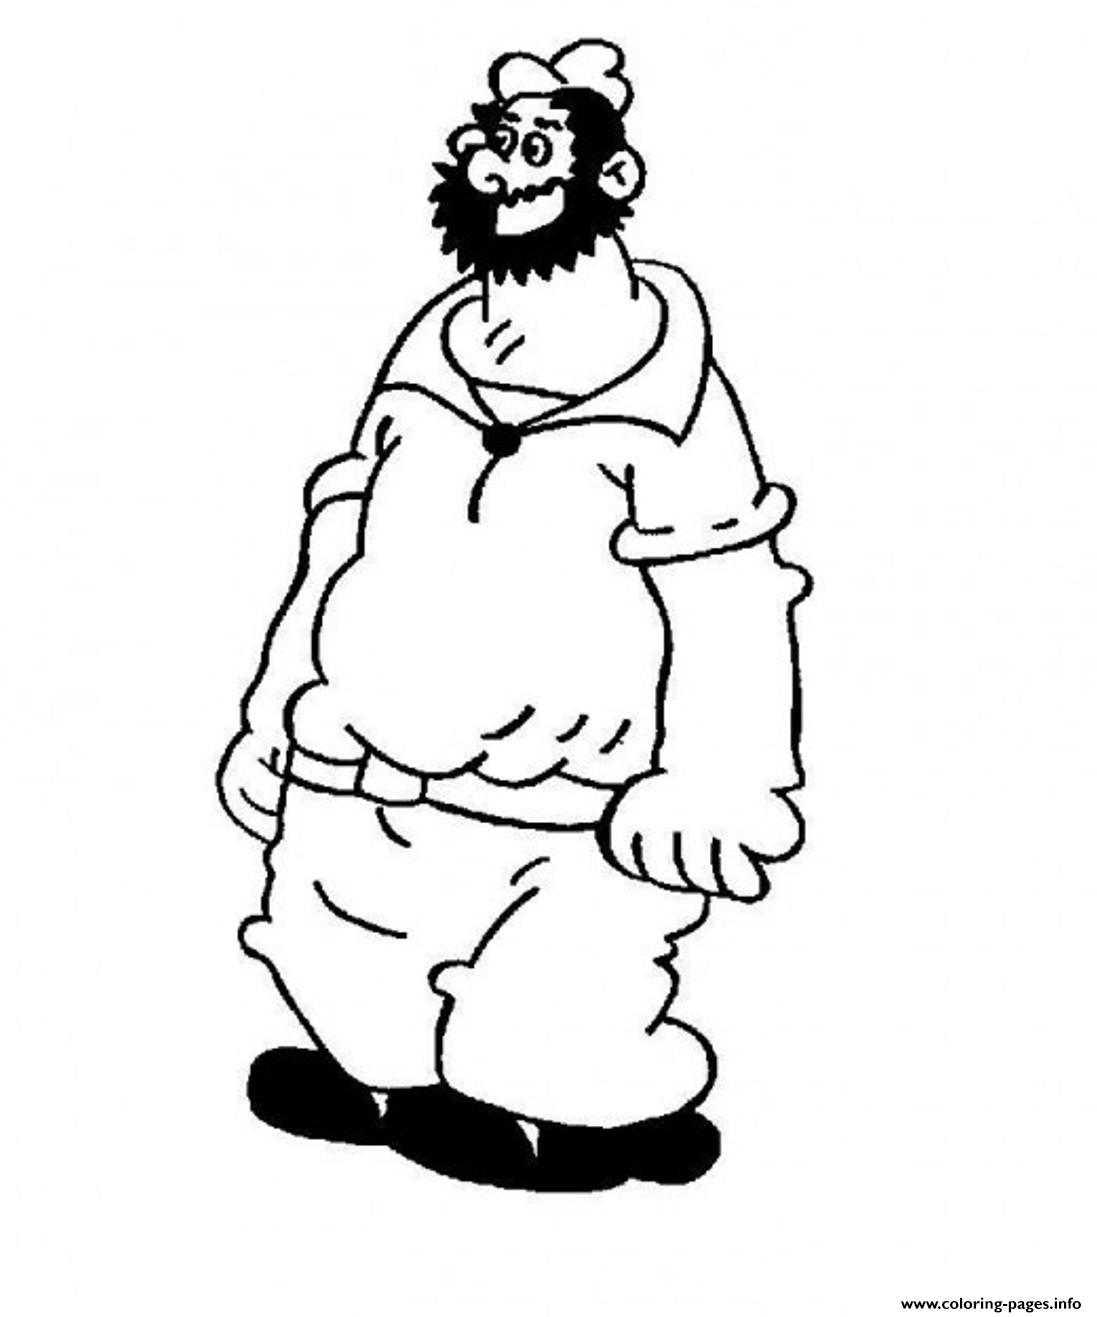 Print bluto popeye sd2b3 Coloring pages